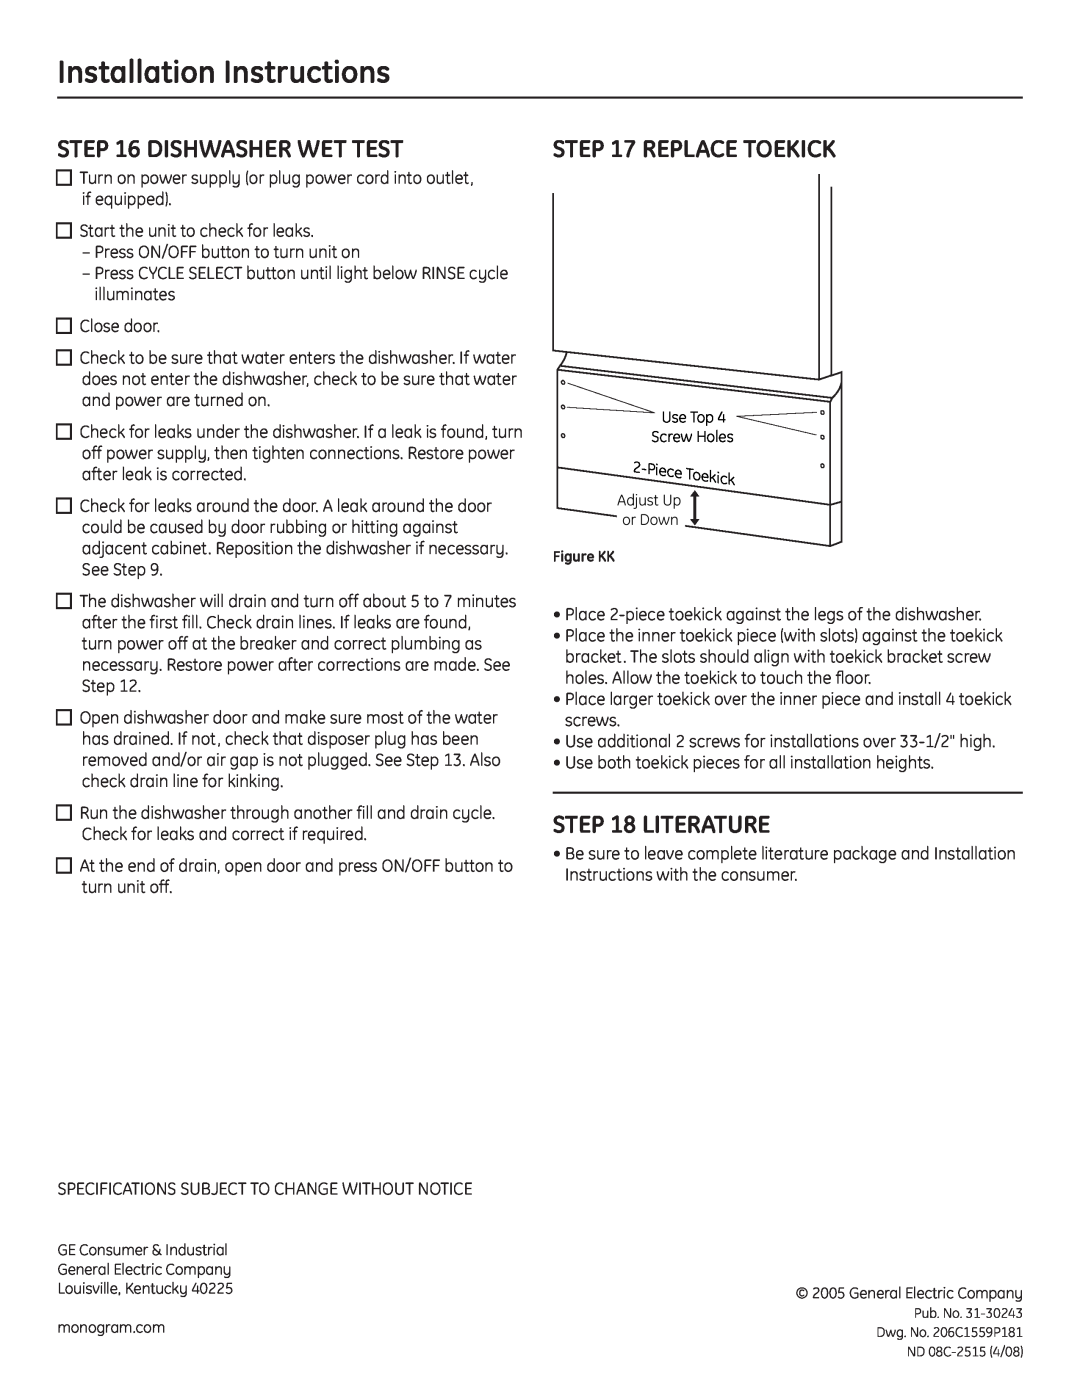 GE ZBD1870NSS installation instructions Dishwasher Wet Test, Replace Toekick, Literature, Installation Instructions 